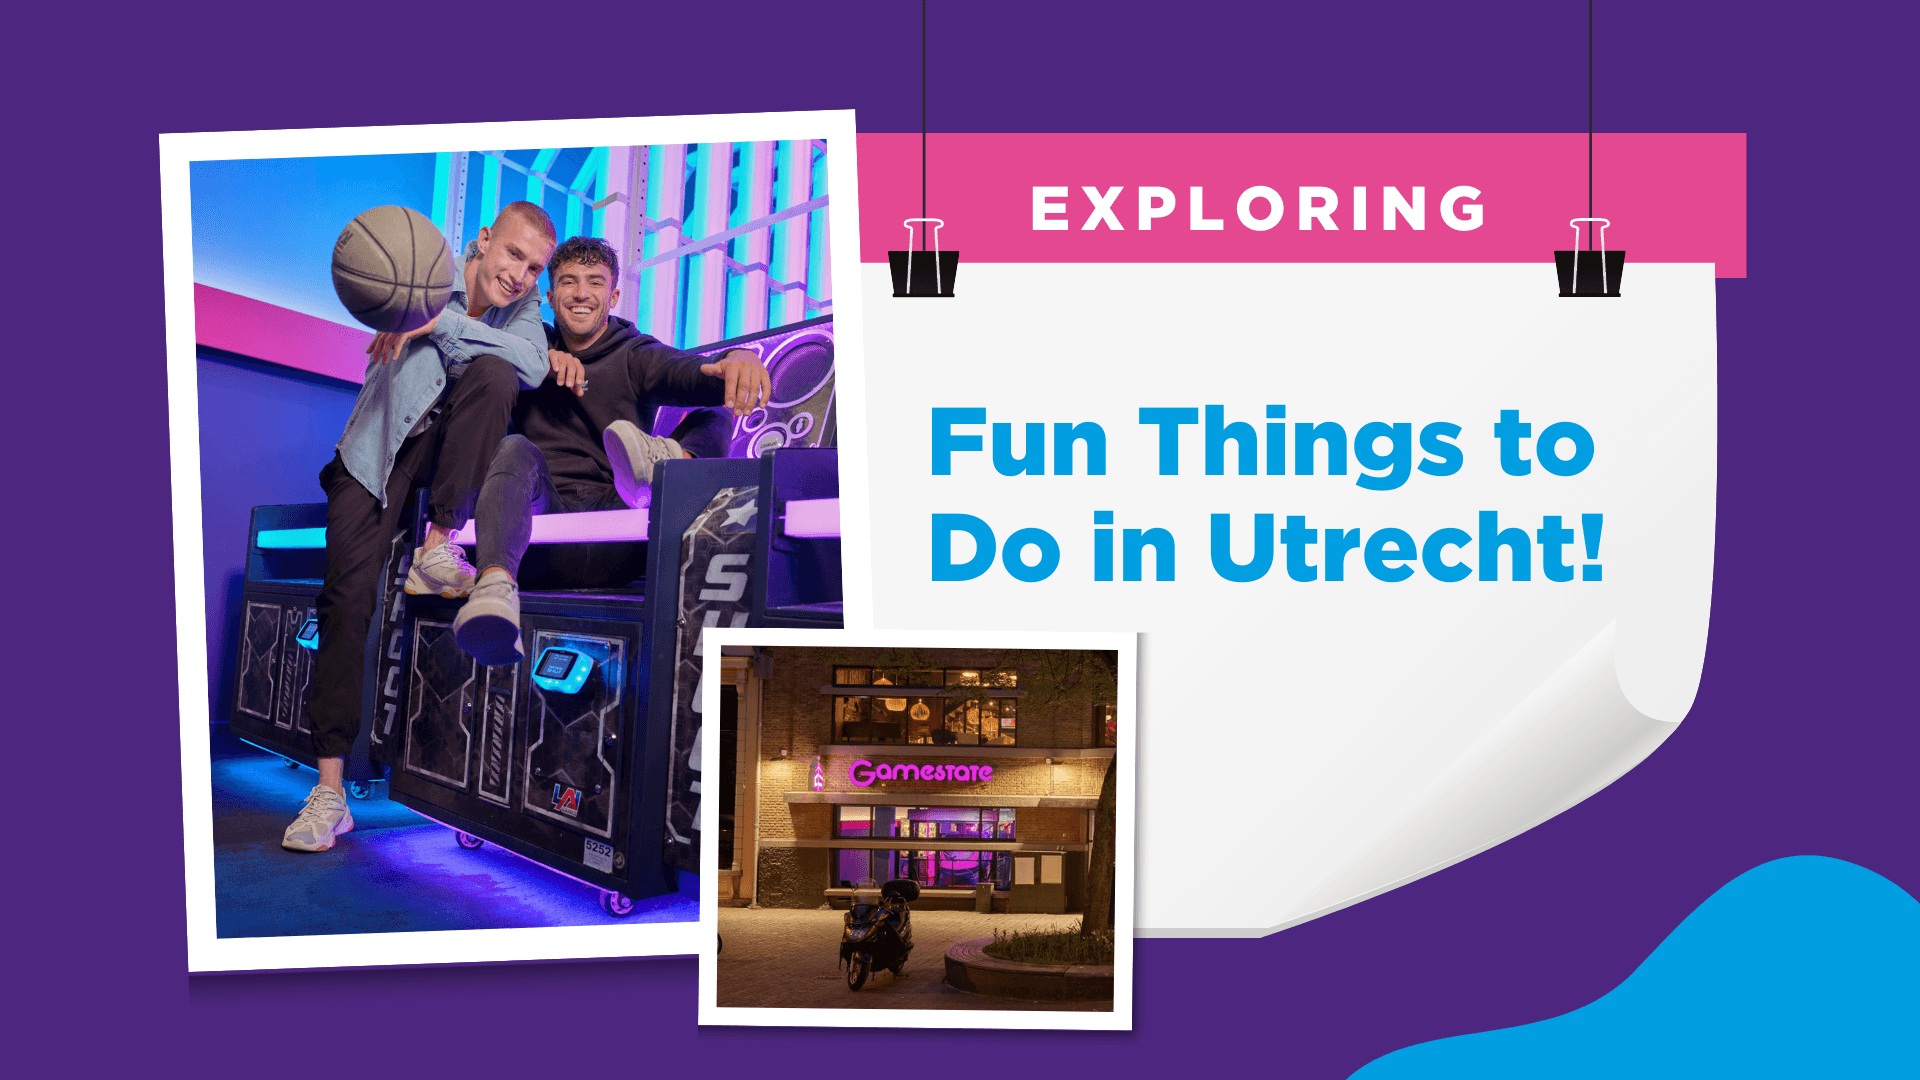 Exploring the fun things to do in Utrecht! - Gamestate